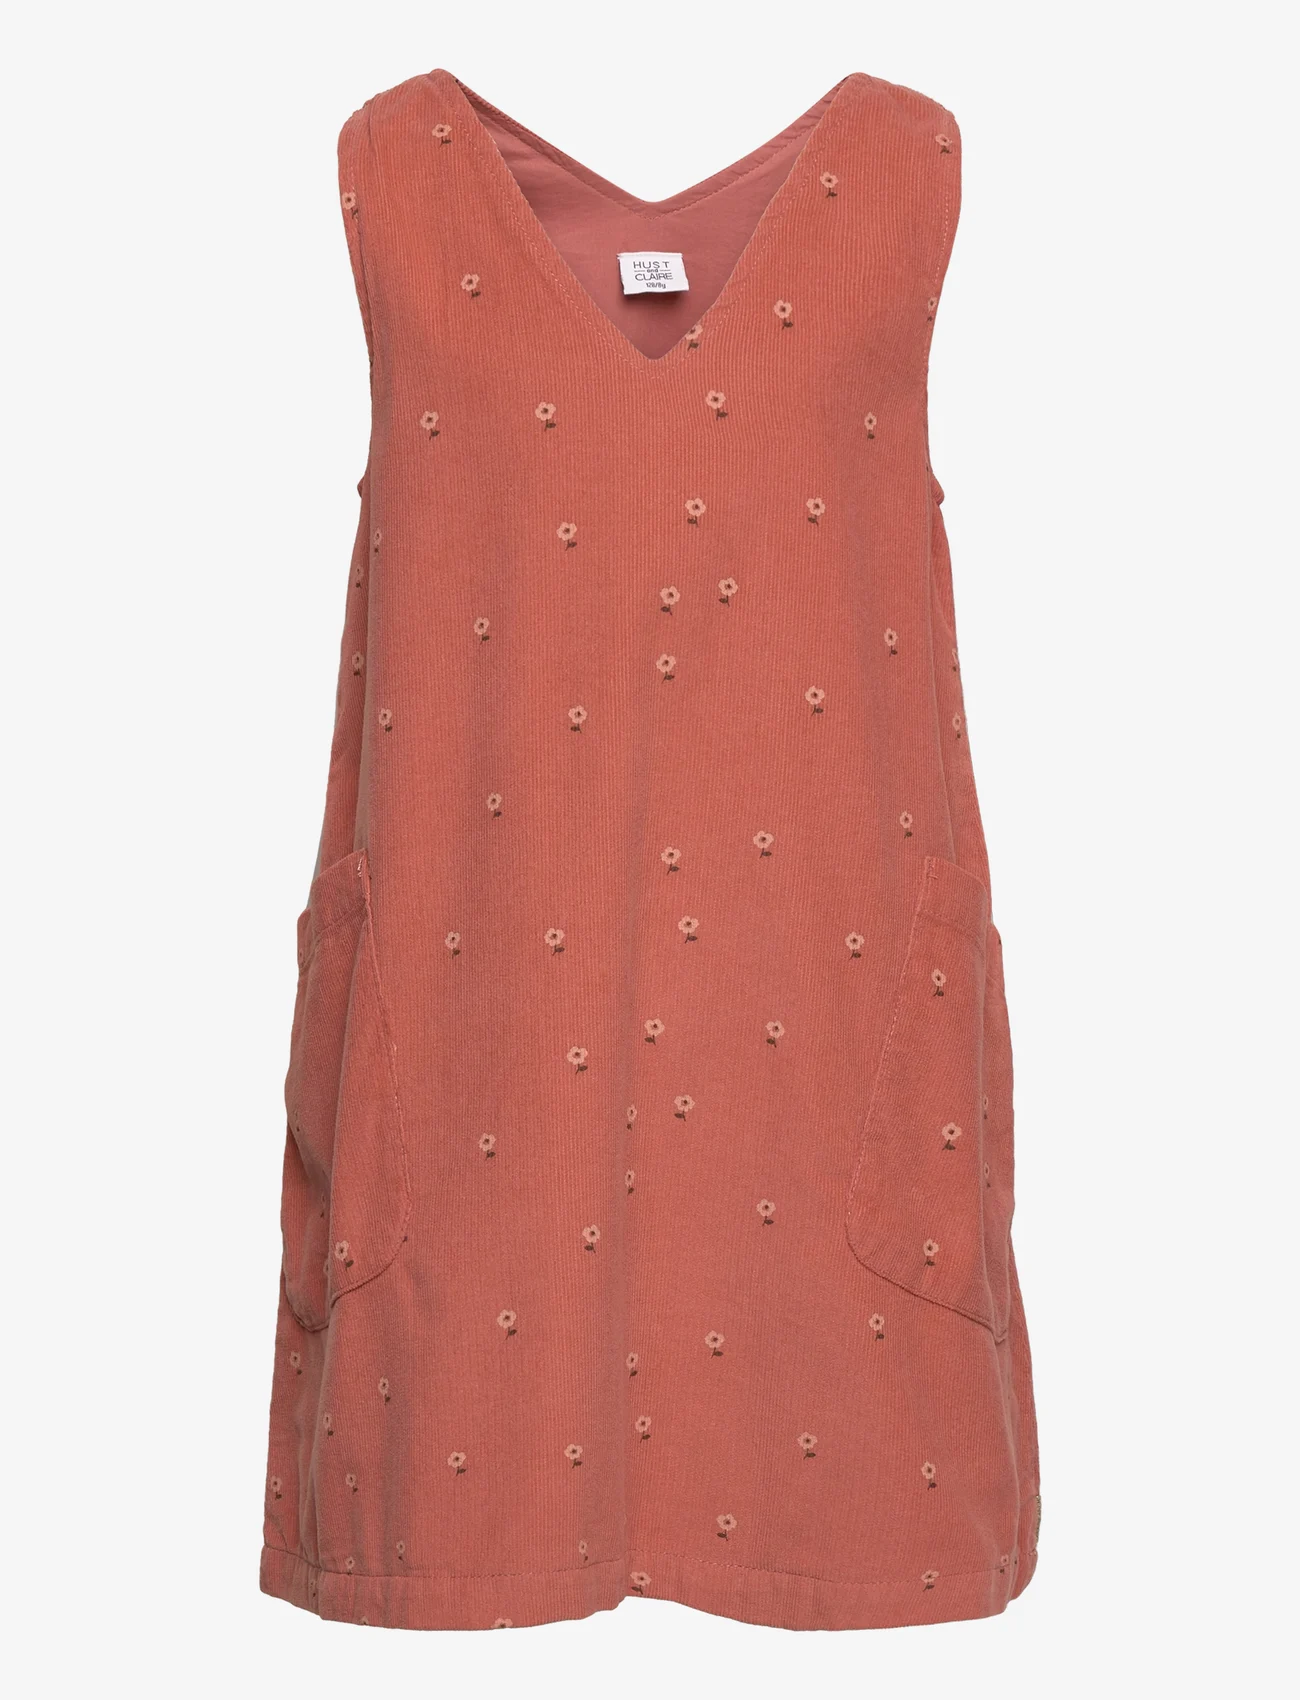 Hust & Claire - Kida - Dress - hihattomat - red clay - 0